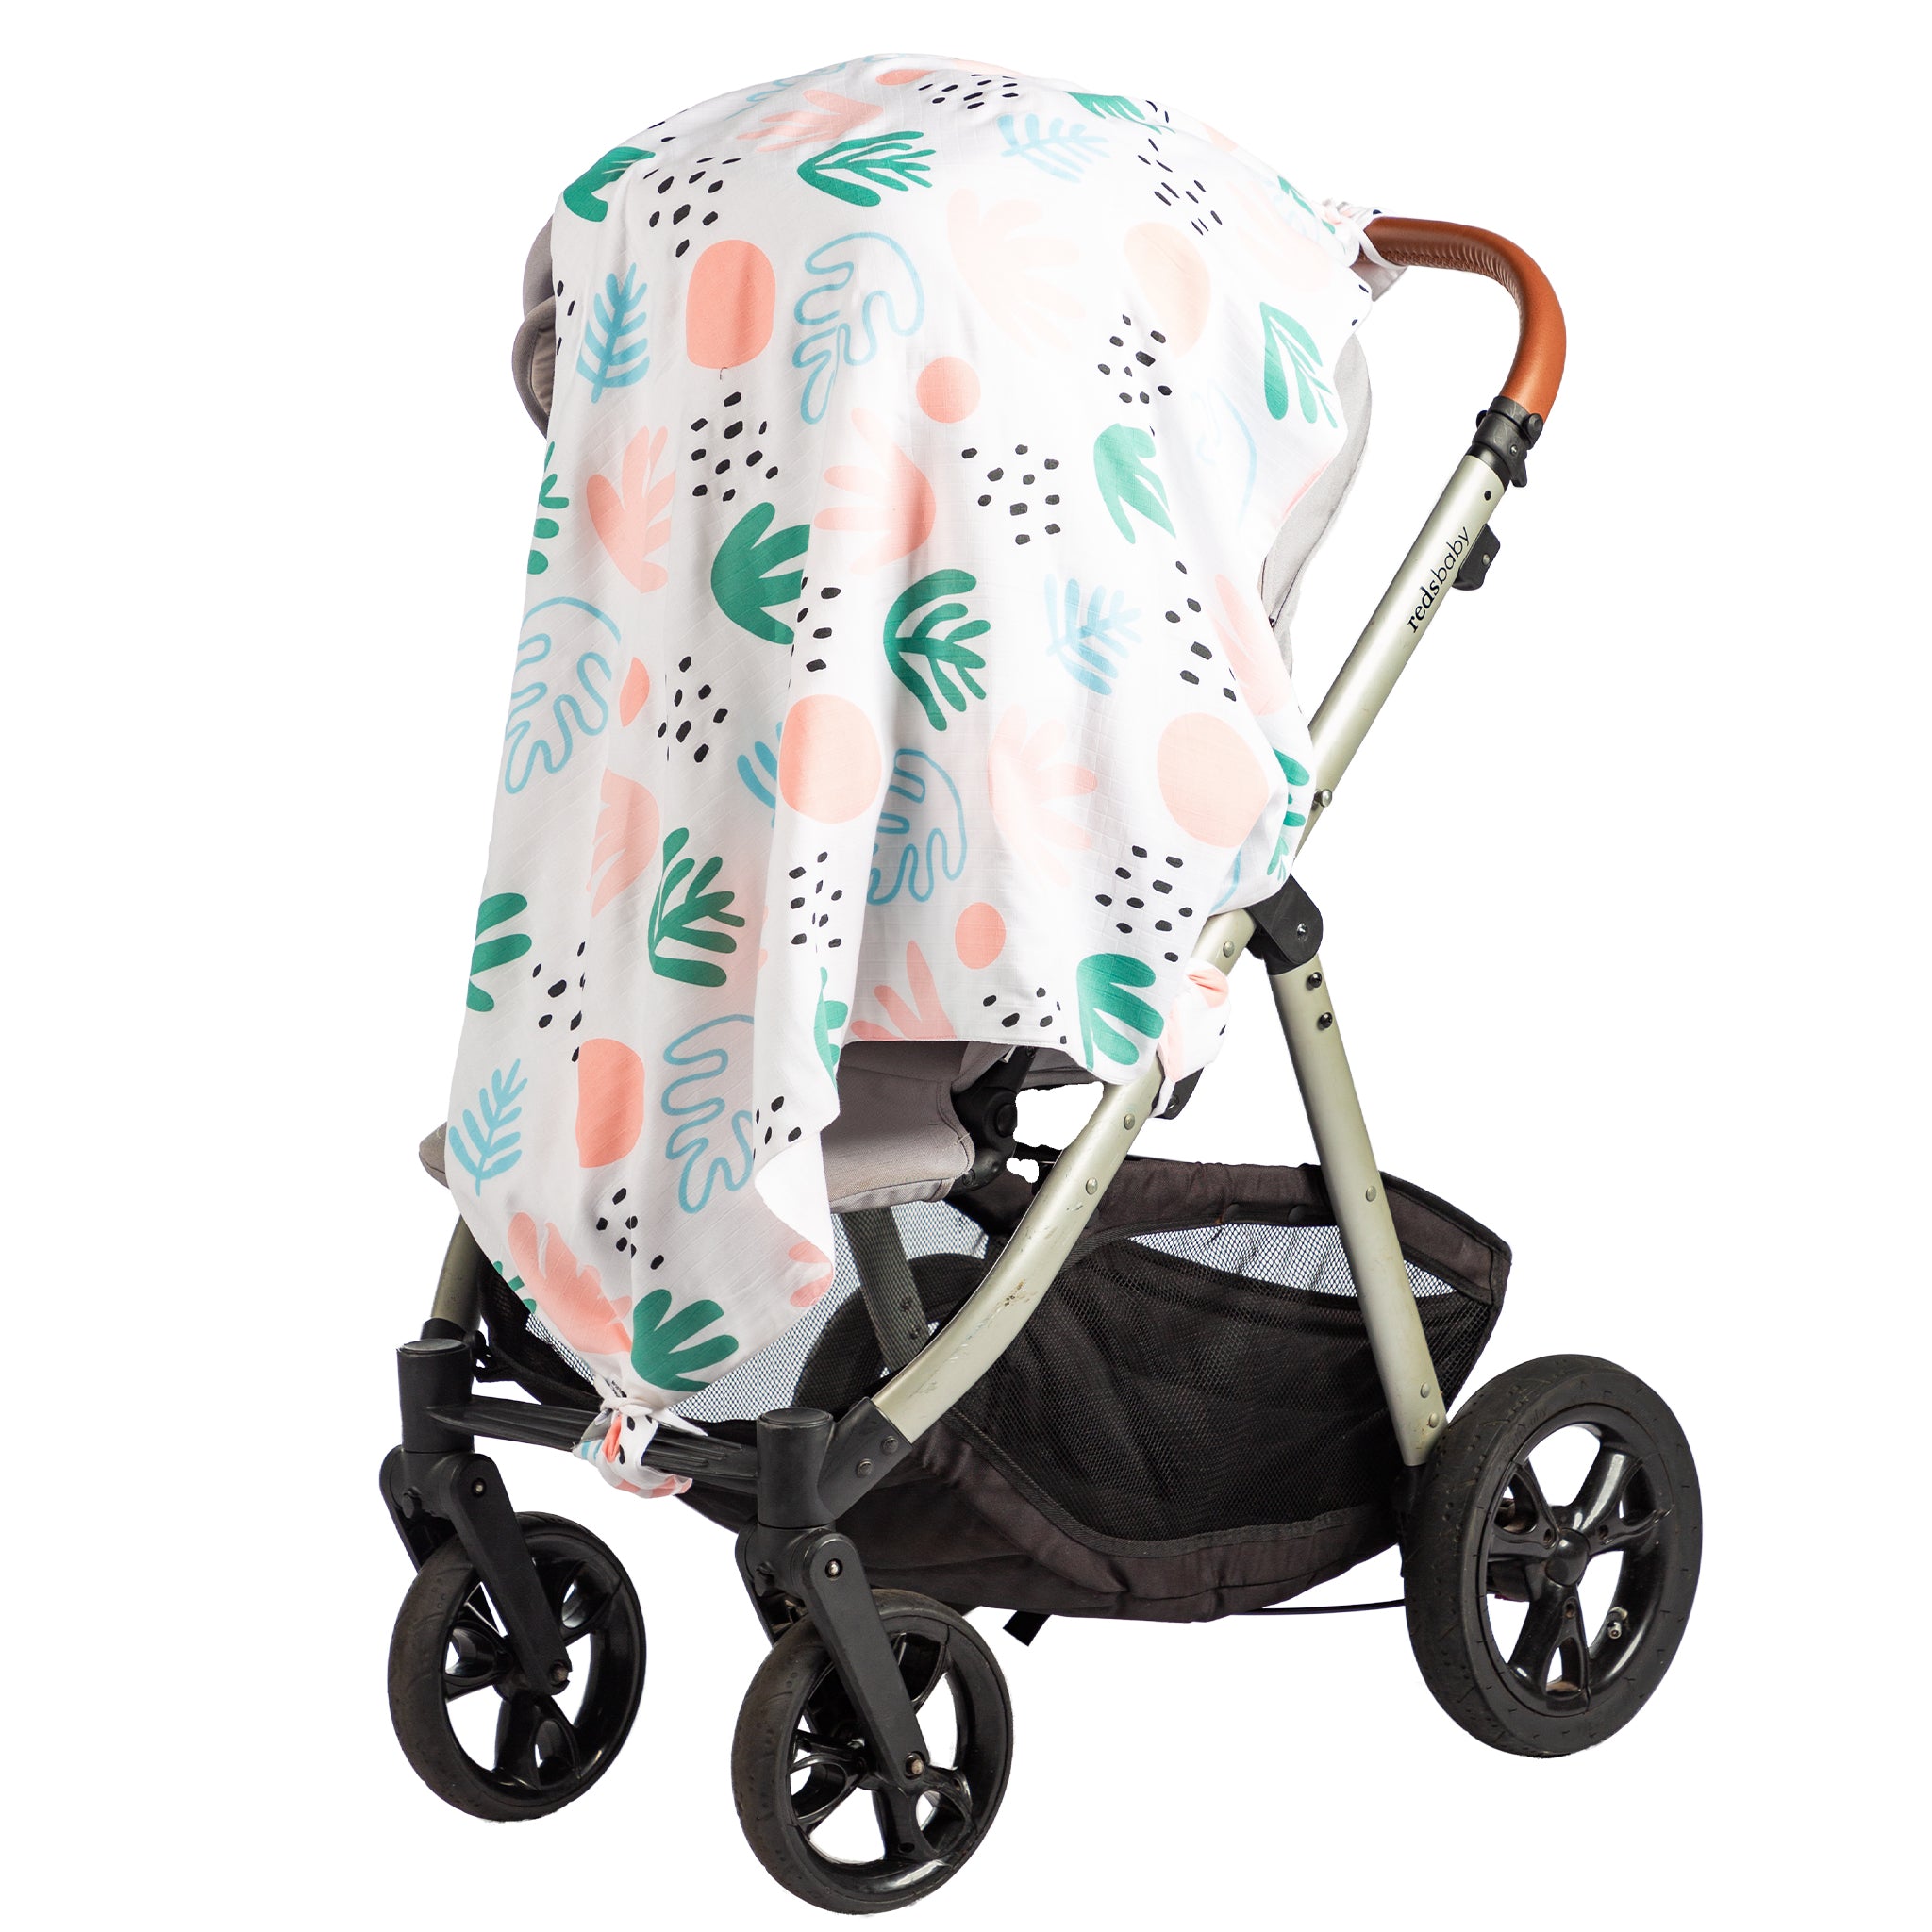 Botanical design musluv cover with green, blue and pink abstract and botanical graphics on a stroller.